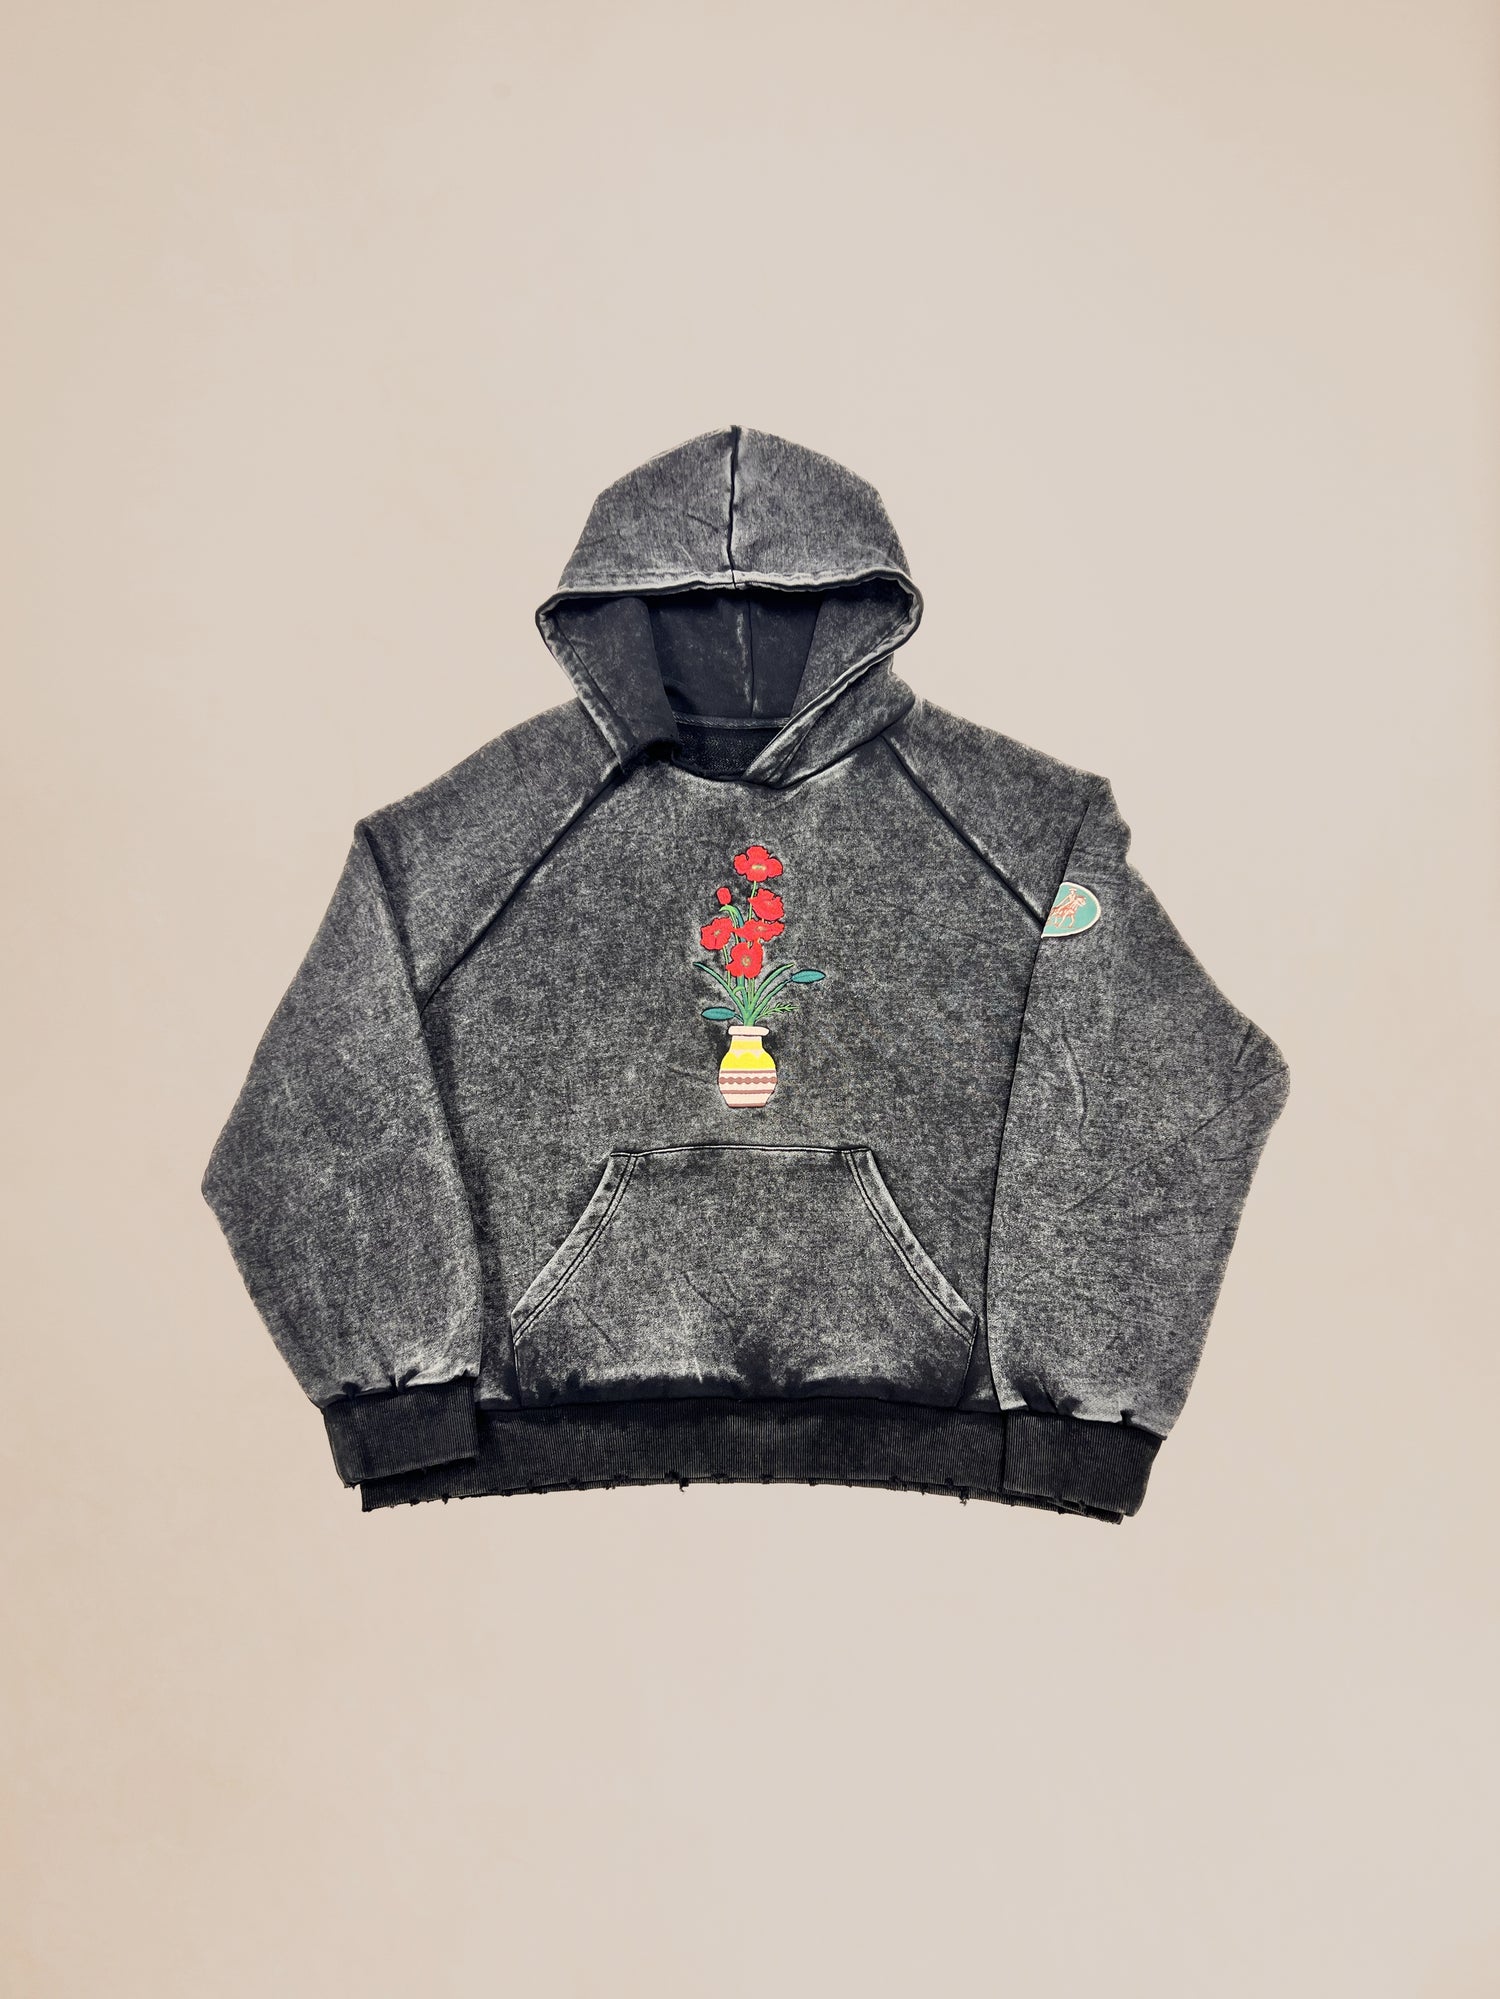 Gray hooded sweatshirt with floral embroidery and patches on a neutral background, offered in our Profound Sample 28 (Dyed Vase Pot Hoodie) Sale.